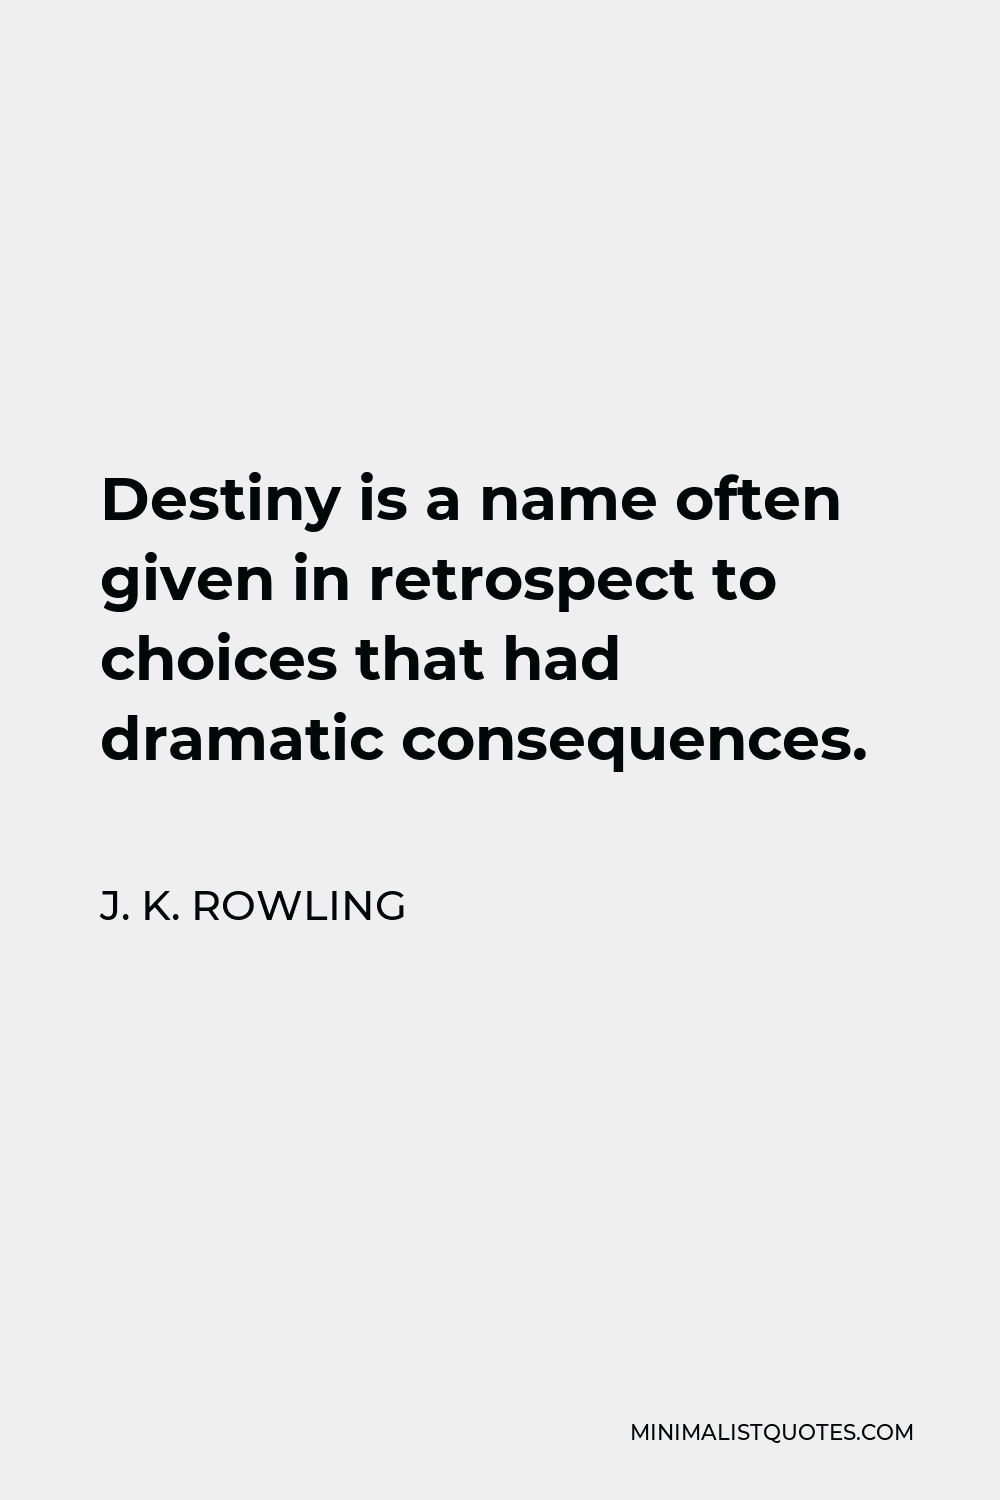 J. K. Rowling Quote - Destiny is a name often given in retrospect to choices that had dramatic consequences.